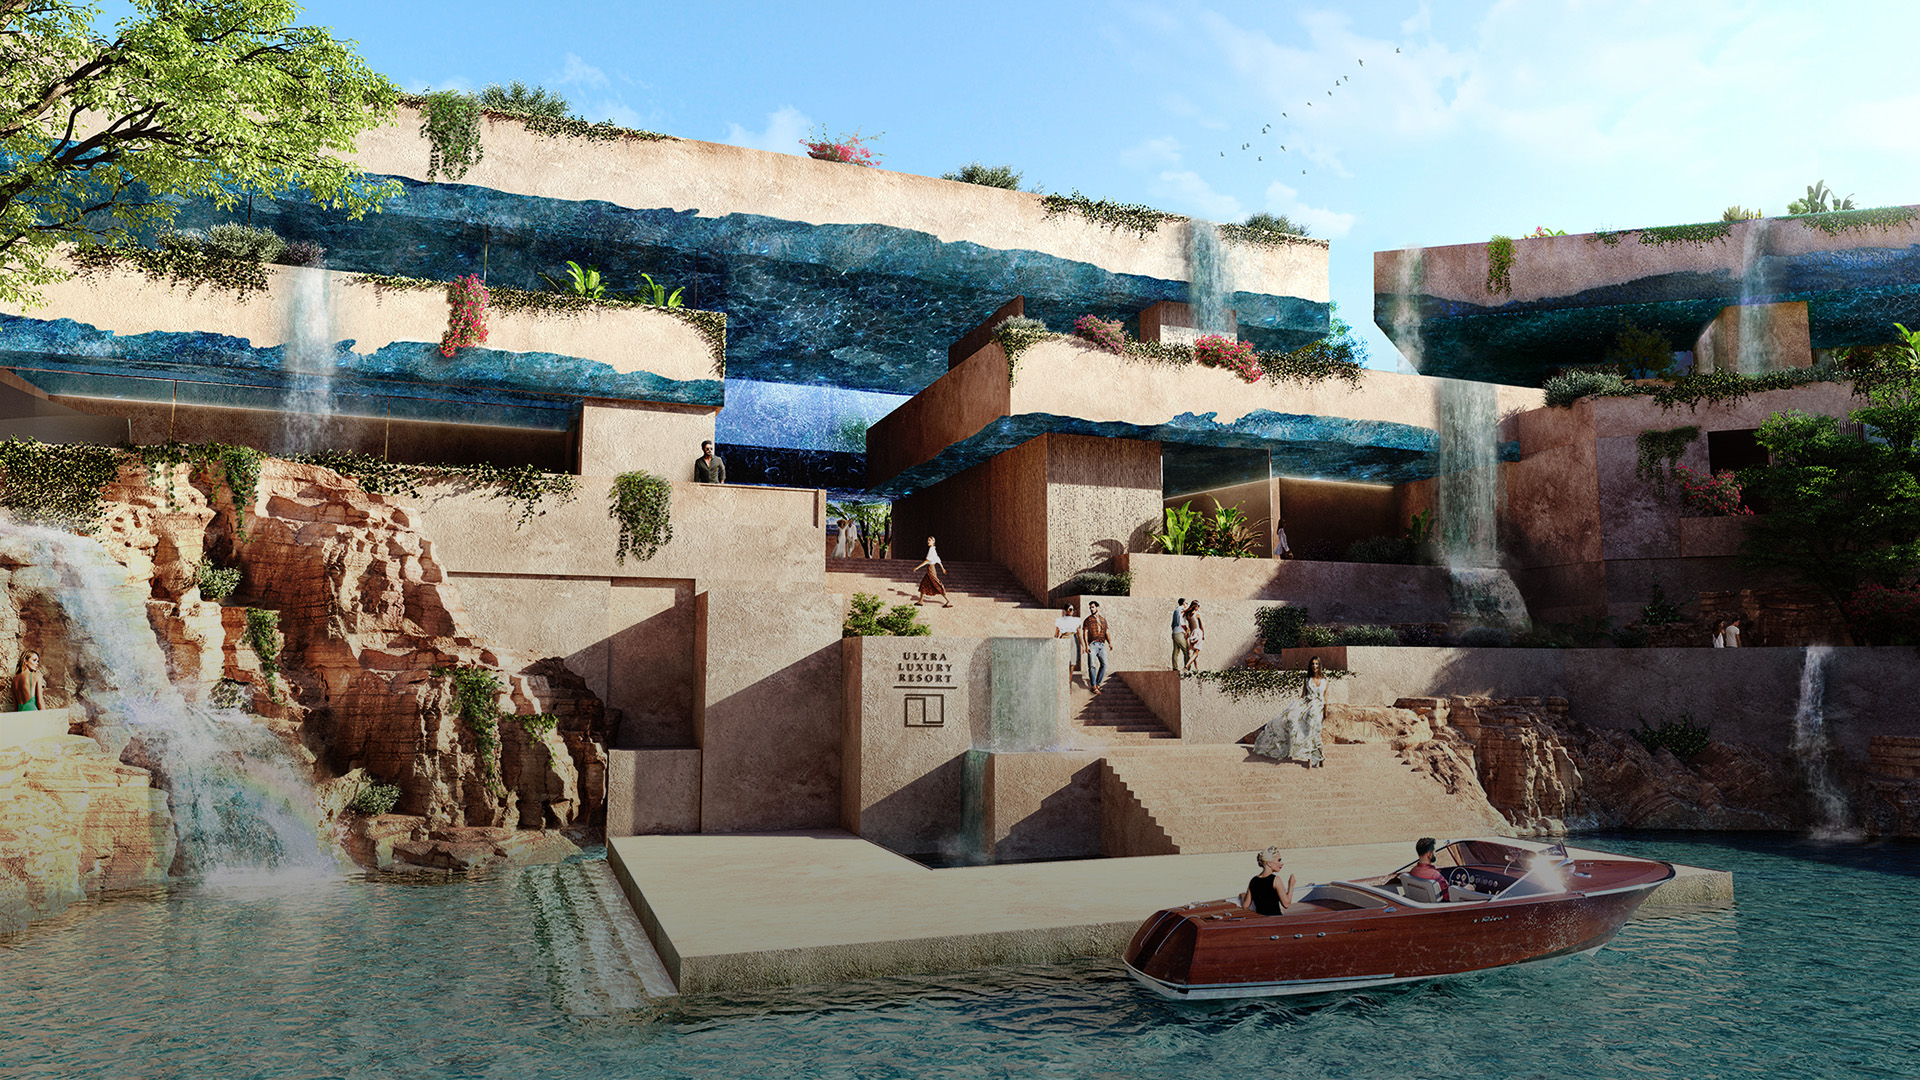 A futuristic ultra-luxury resort with a cascading waterfall and a small boat on the water in the foreground